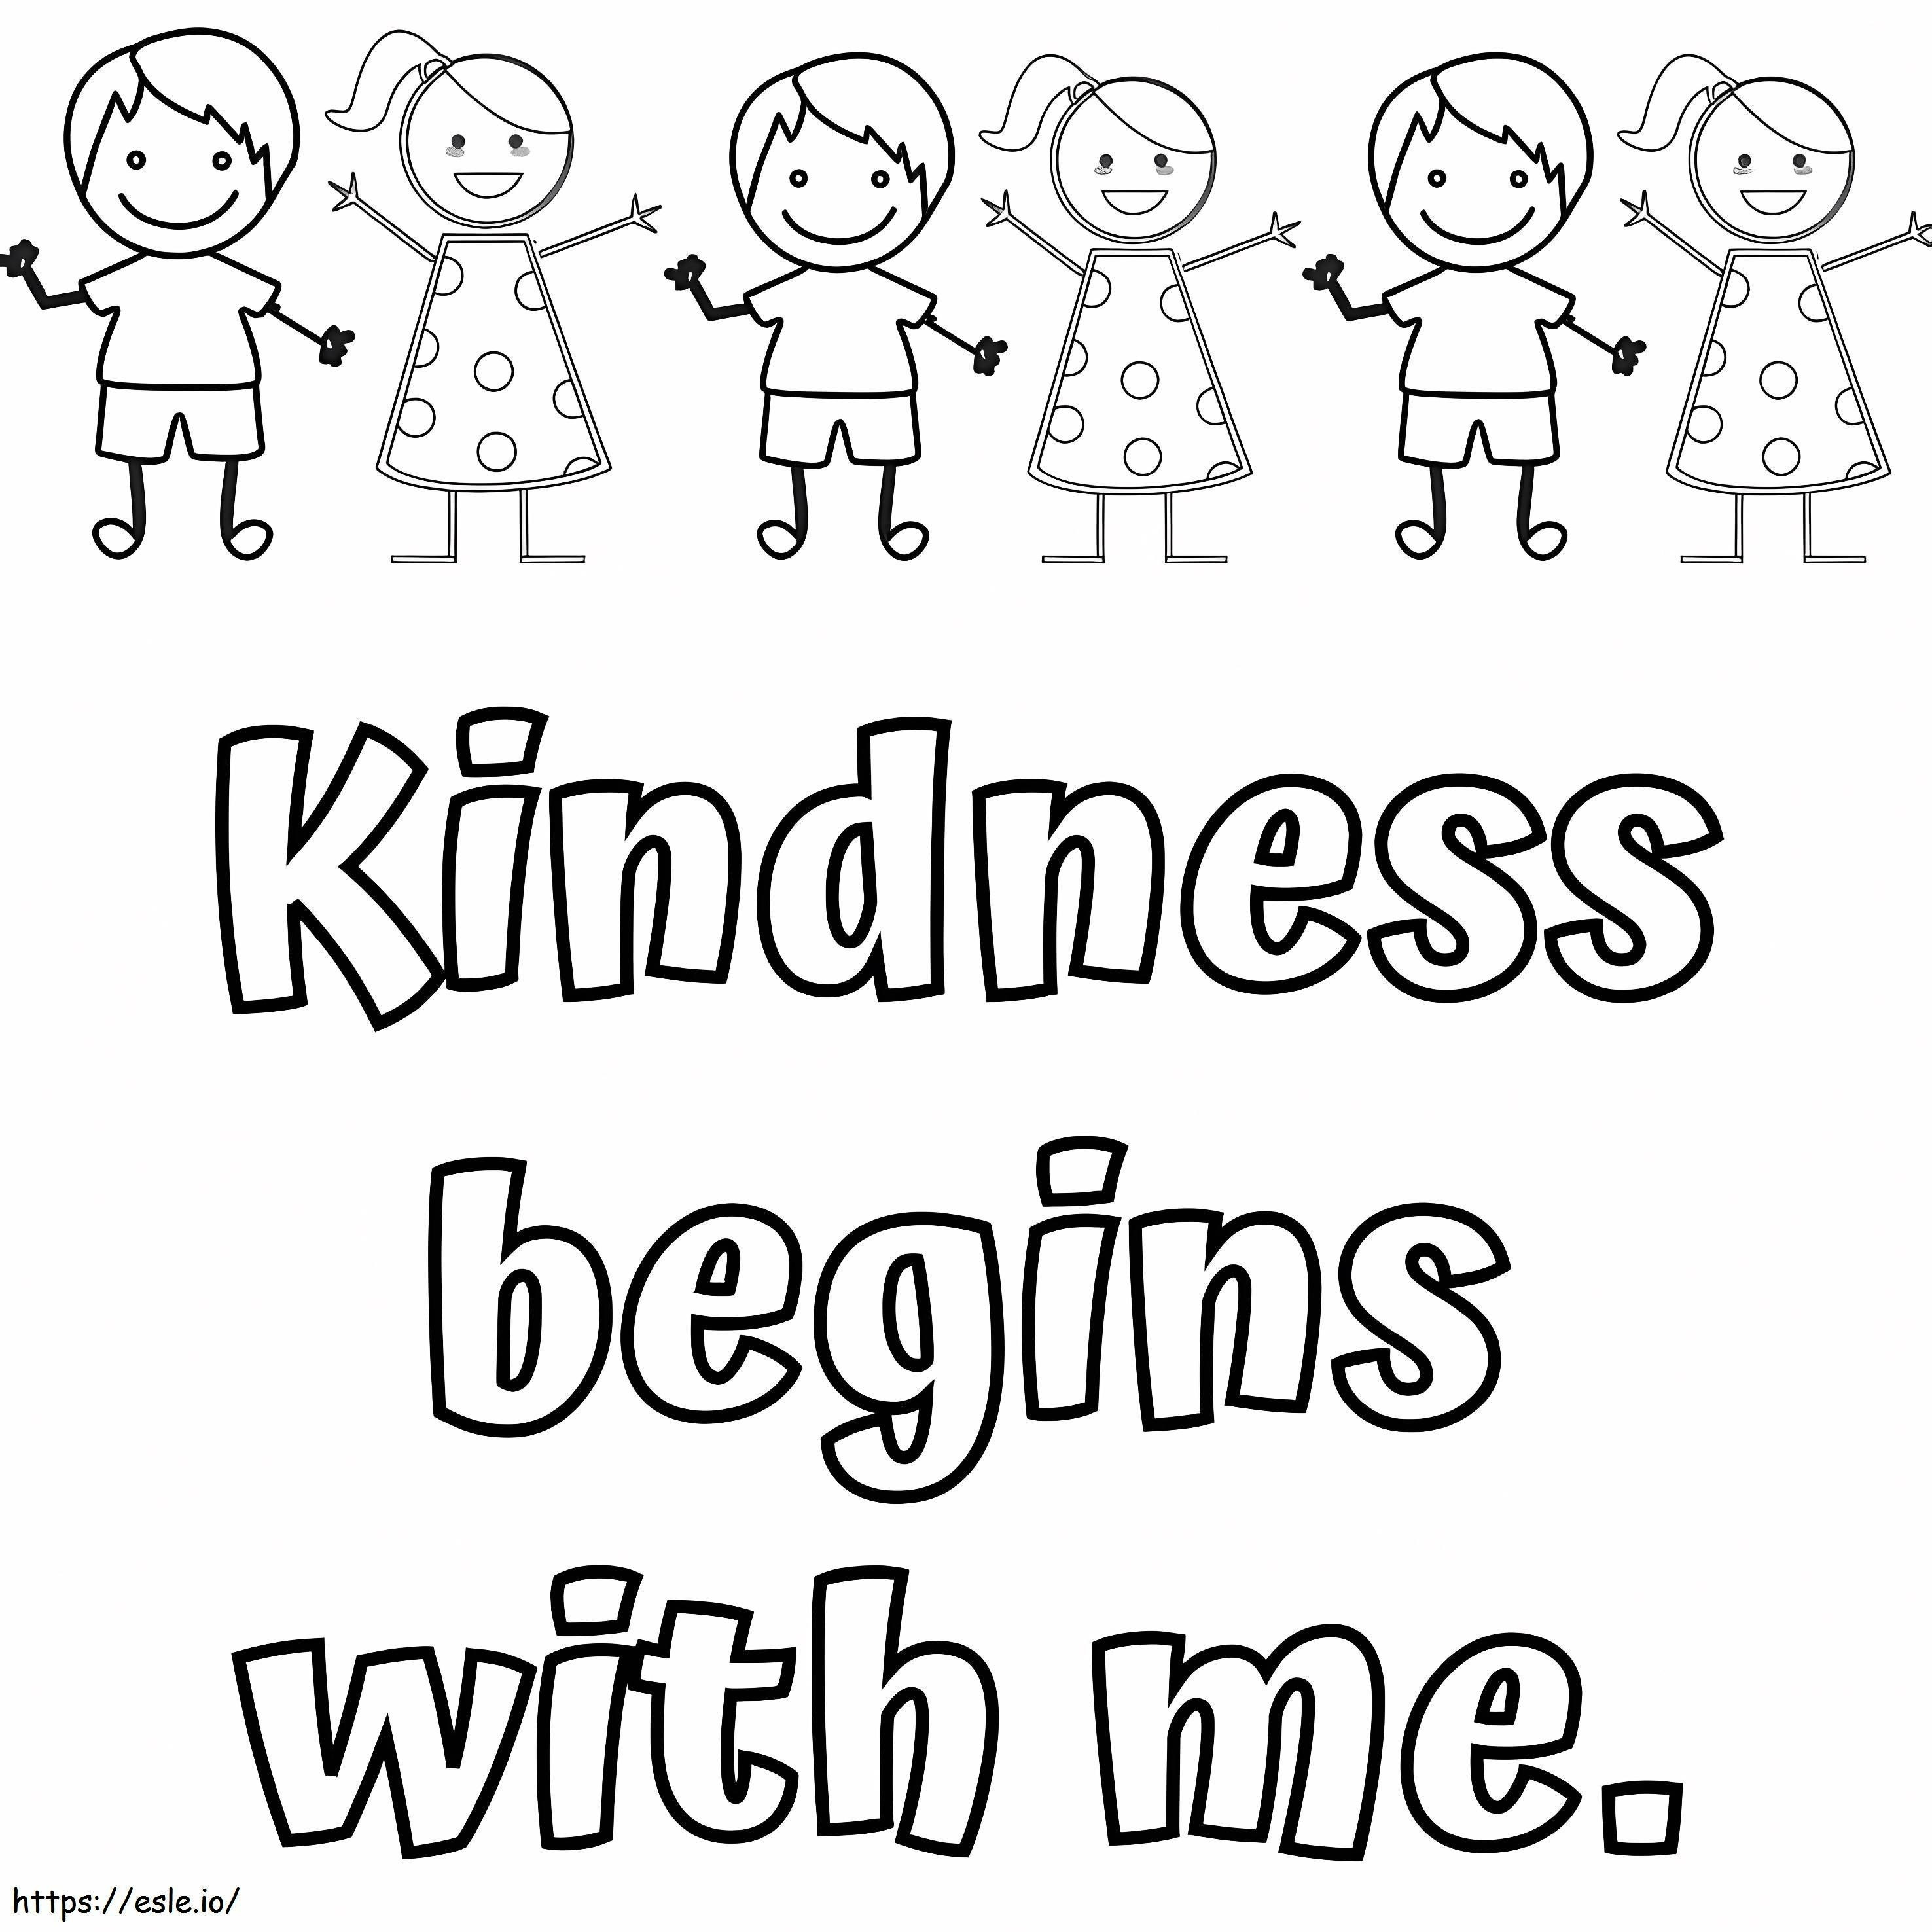 Printable Kindness Begins With Me coloring page